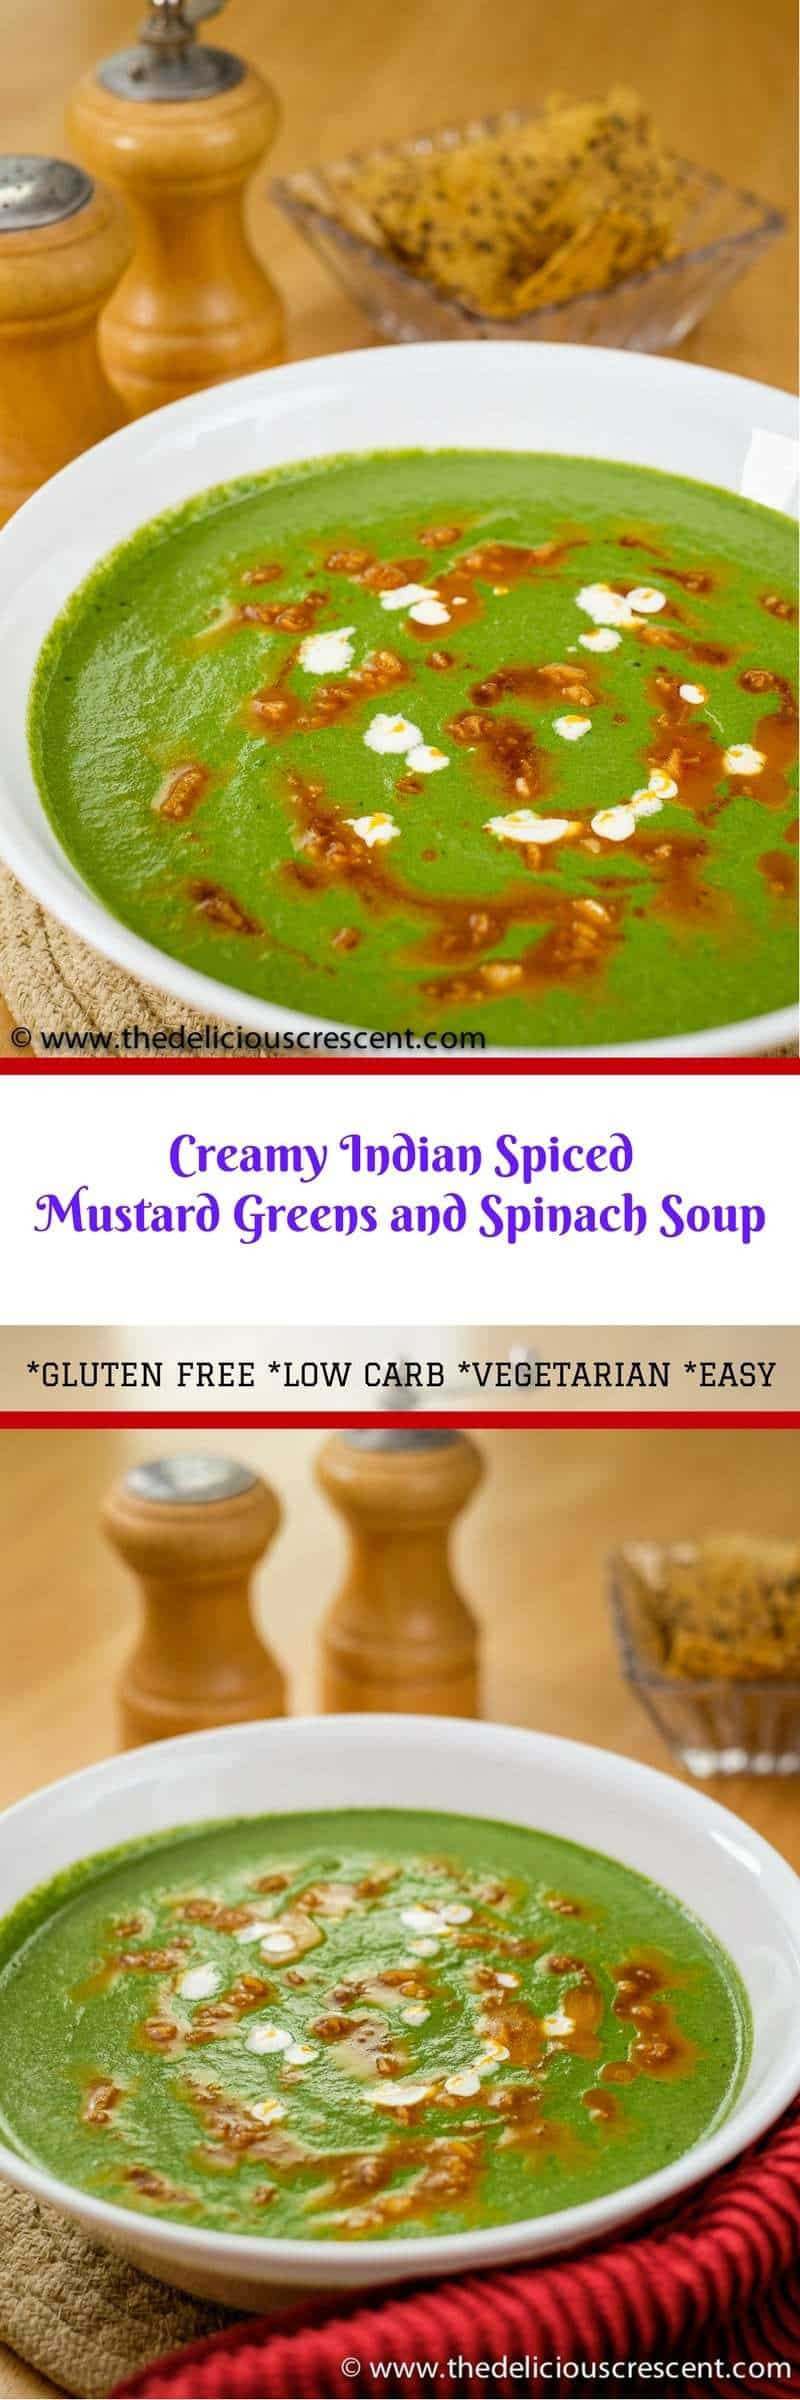 Mustard Greens Indian Recipes
 Creamy Mustard Greens and Spinach Soup